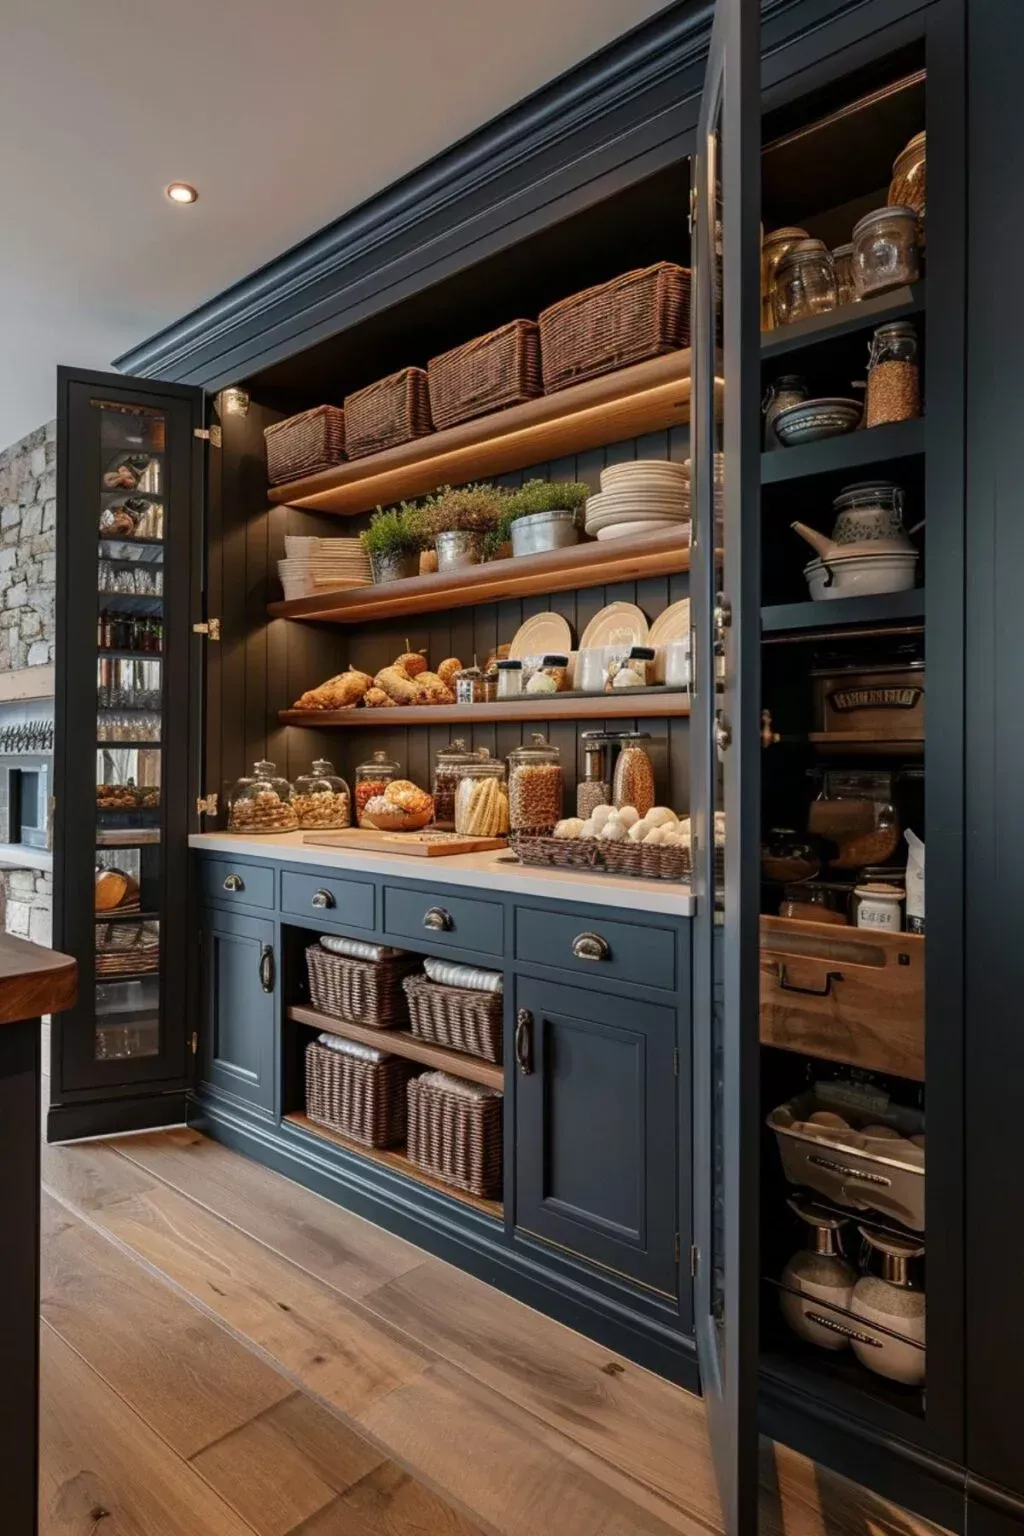 Transform Your Kitchen with Chic and Functional Cabinet Designs